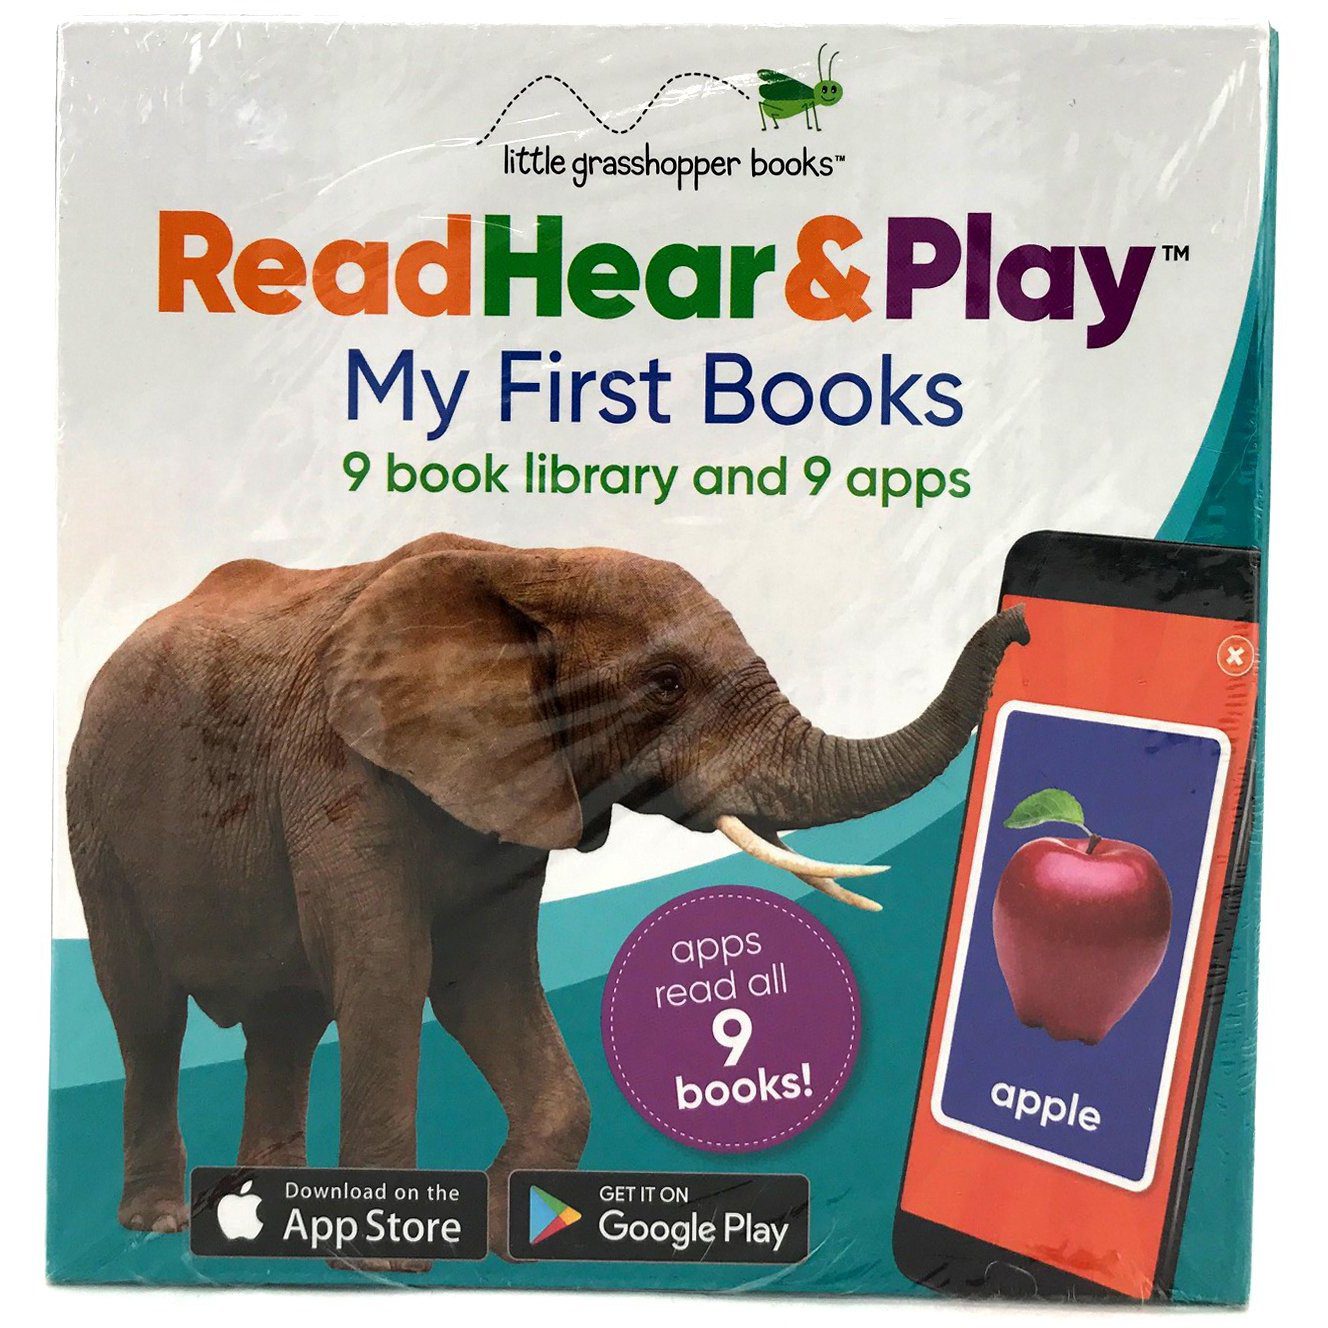 Little Grasshopper Books / Read Hear & Play / Childs Interactive Toy / 9 Books with Downloadable App